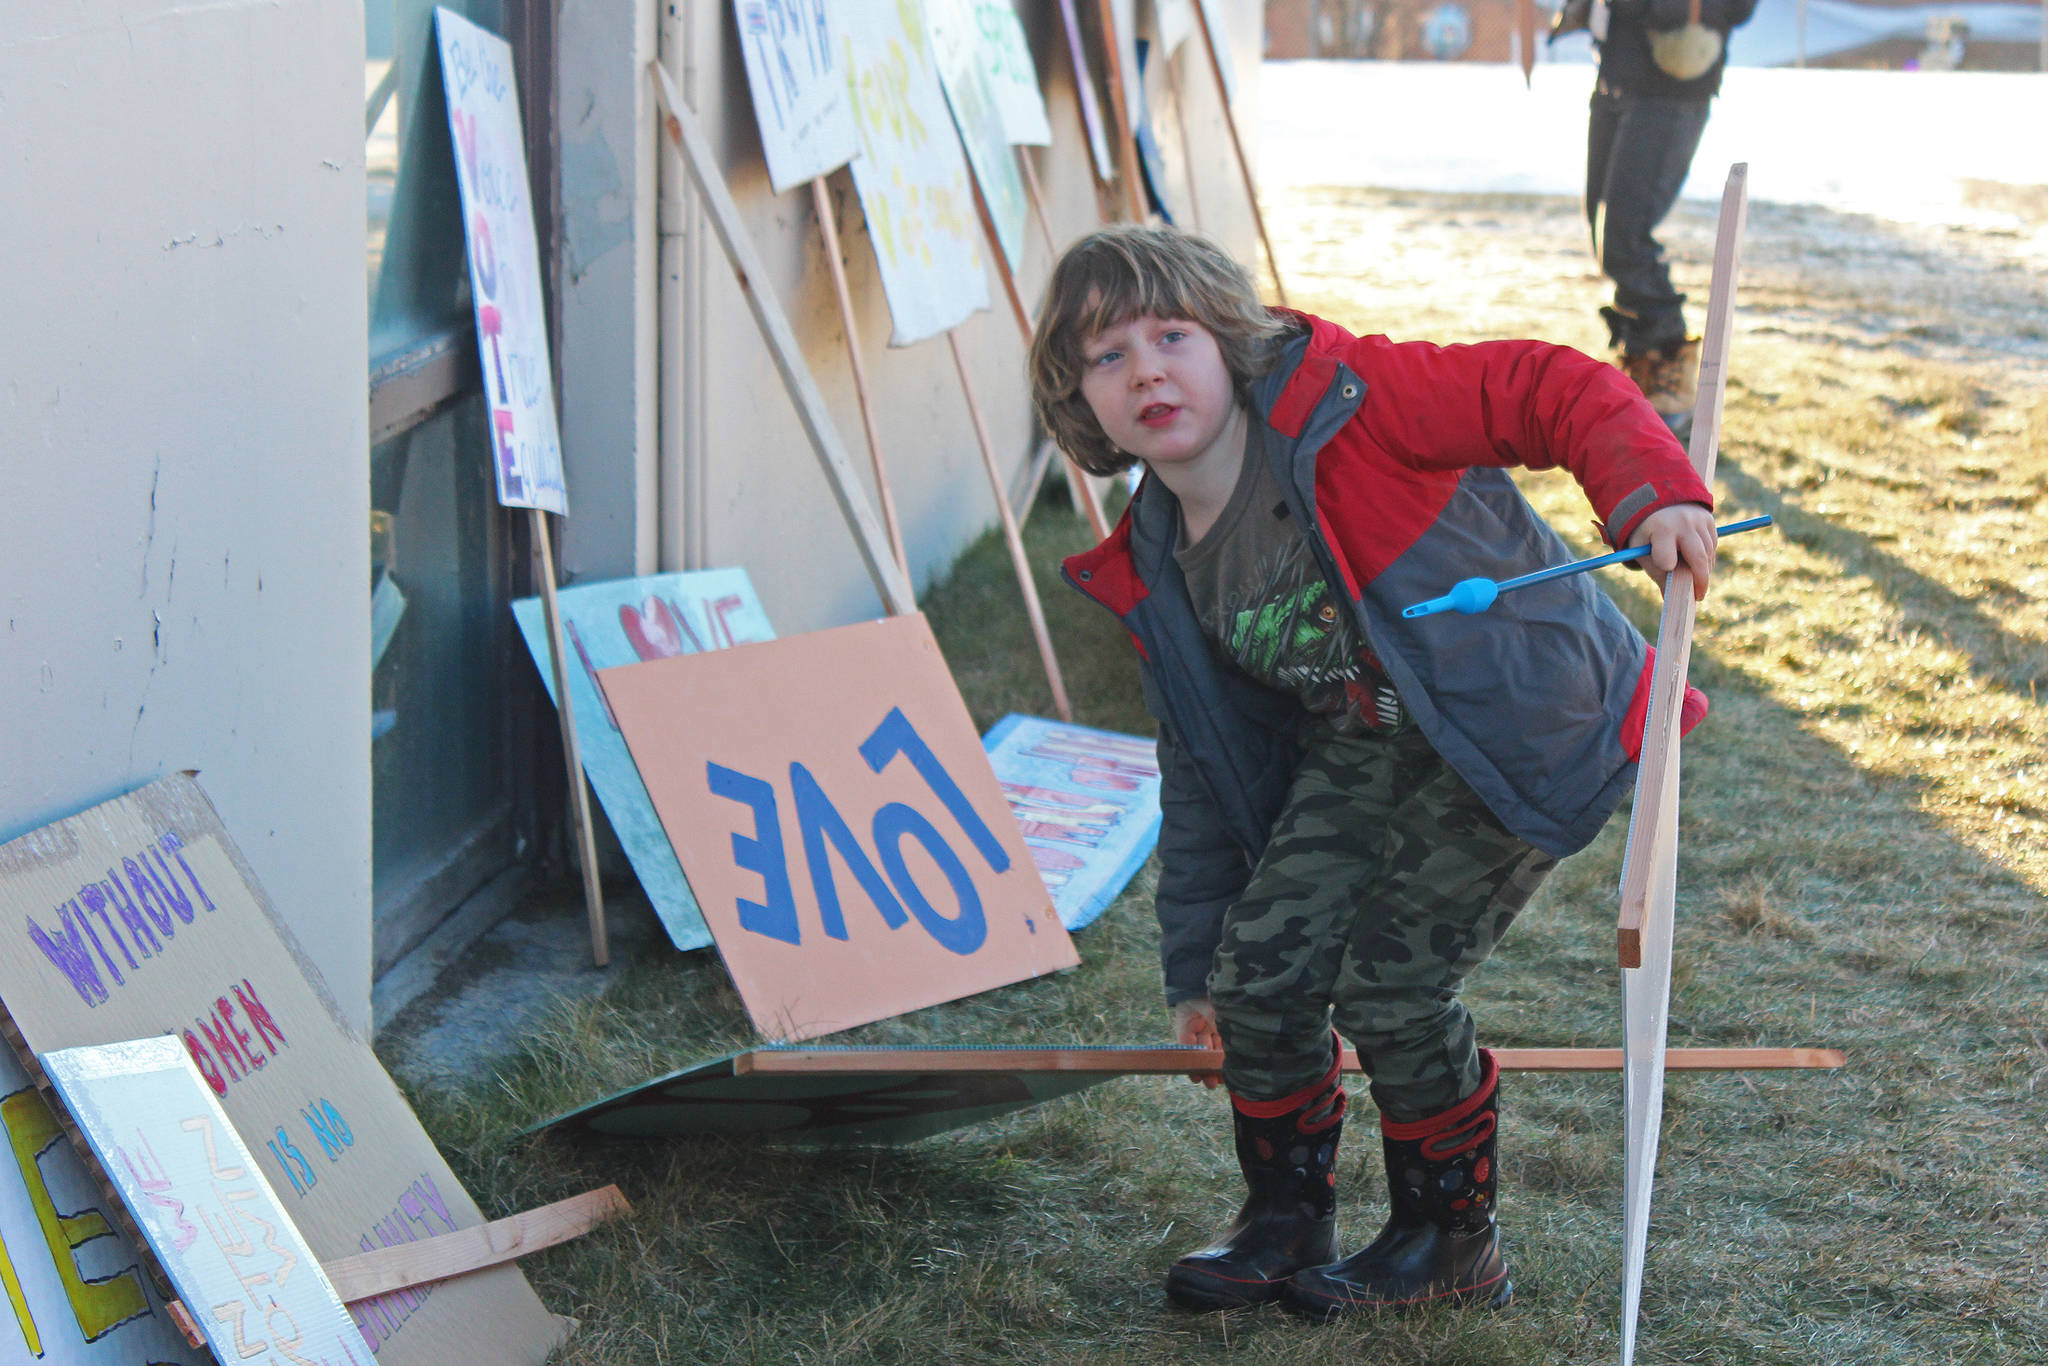 Evan Spencer, 6, of Anchor Point, opts for a different sign to carry Saturday, Jan. 19, 2019 at the third Women’s March on Homer at the Homer Education and Recreation Complex in Homer, Alaska. (Photo by Megan Pacer/Homer News)